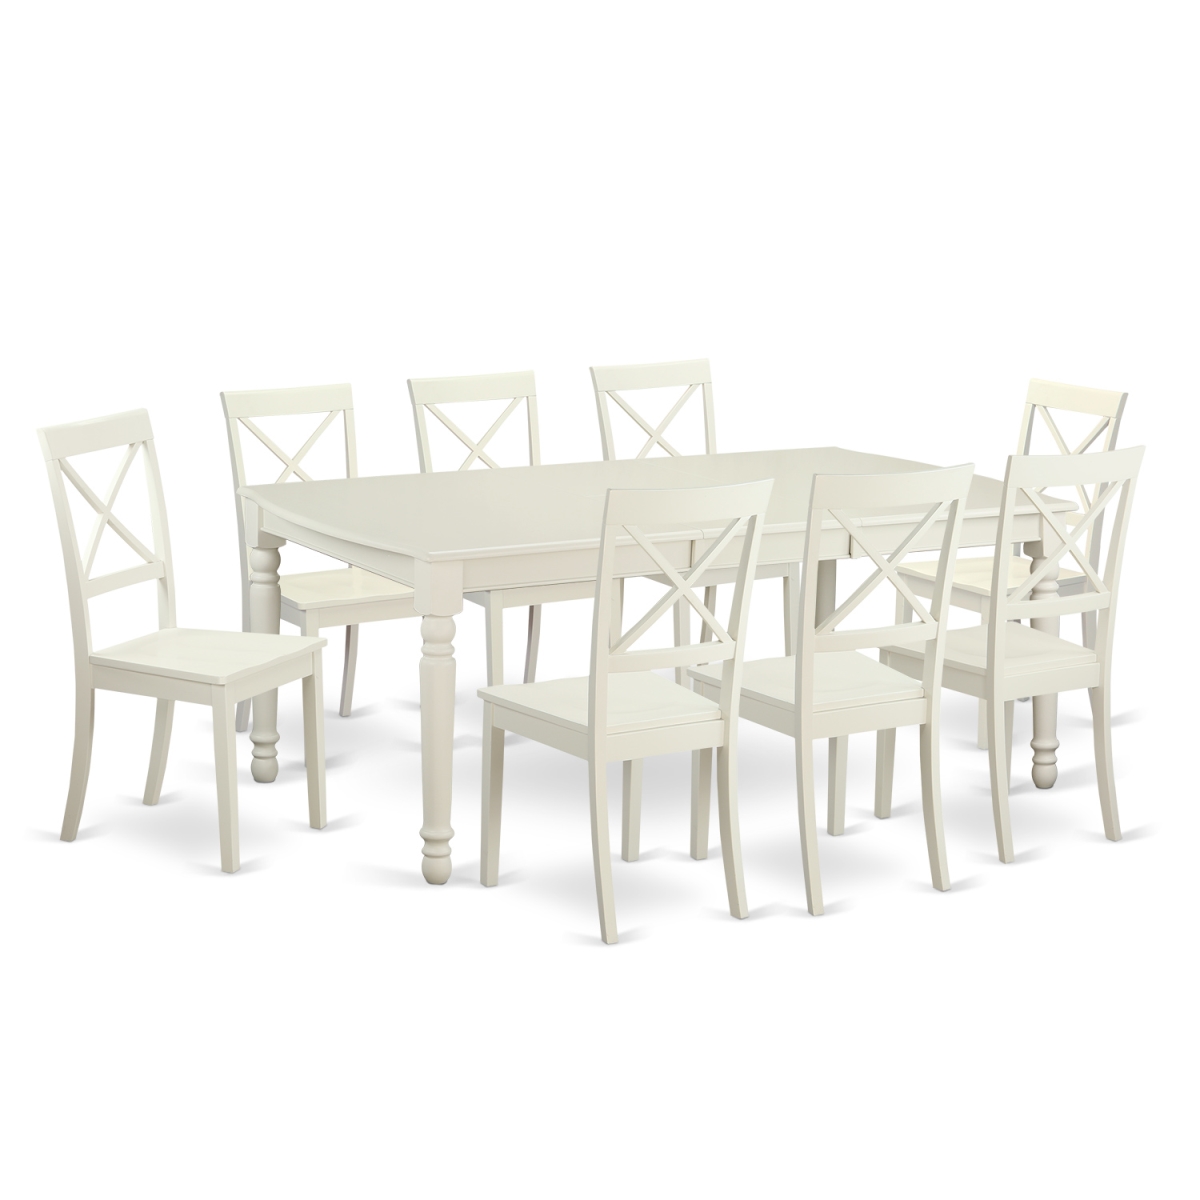 Picture of East West Furniture DOBO9-LWH-W Dinette Table Set with 8 Dining Room Table & 8 Chairs, Linen White - 9 Piece